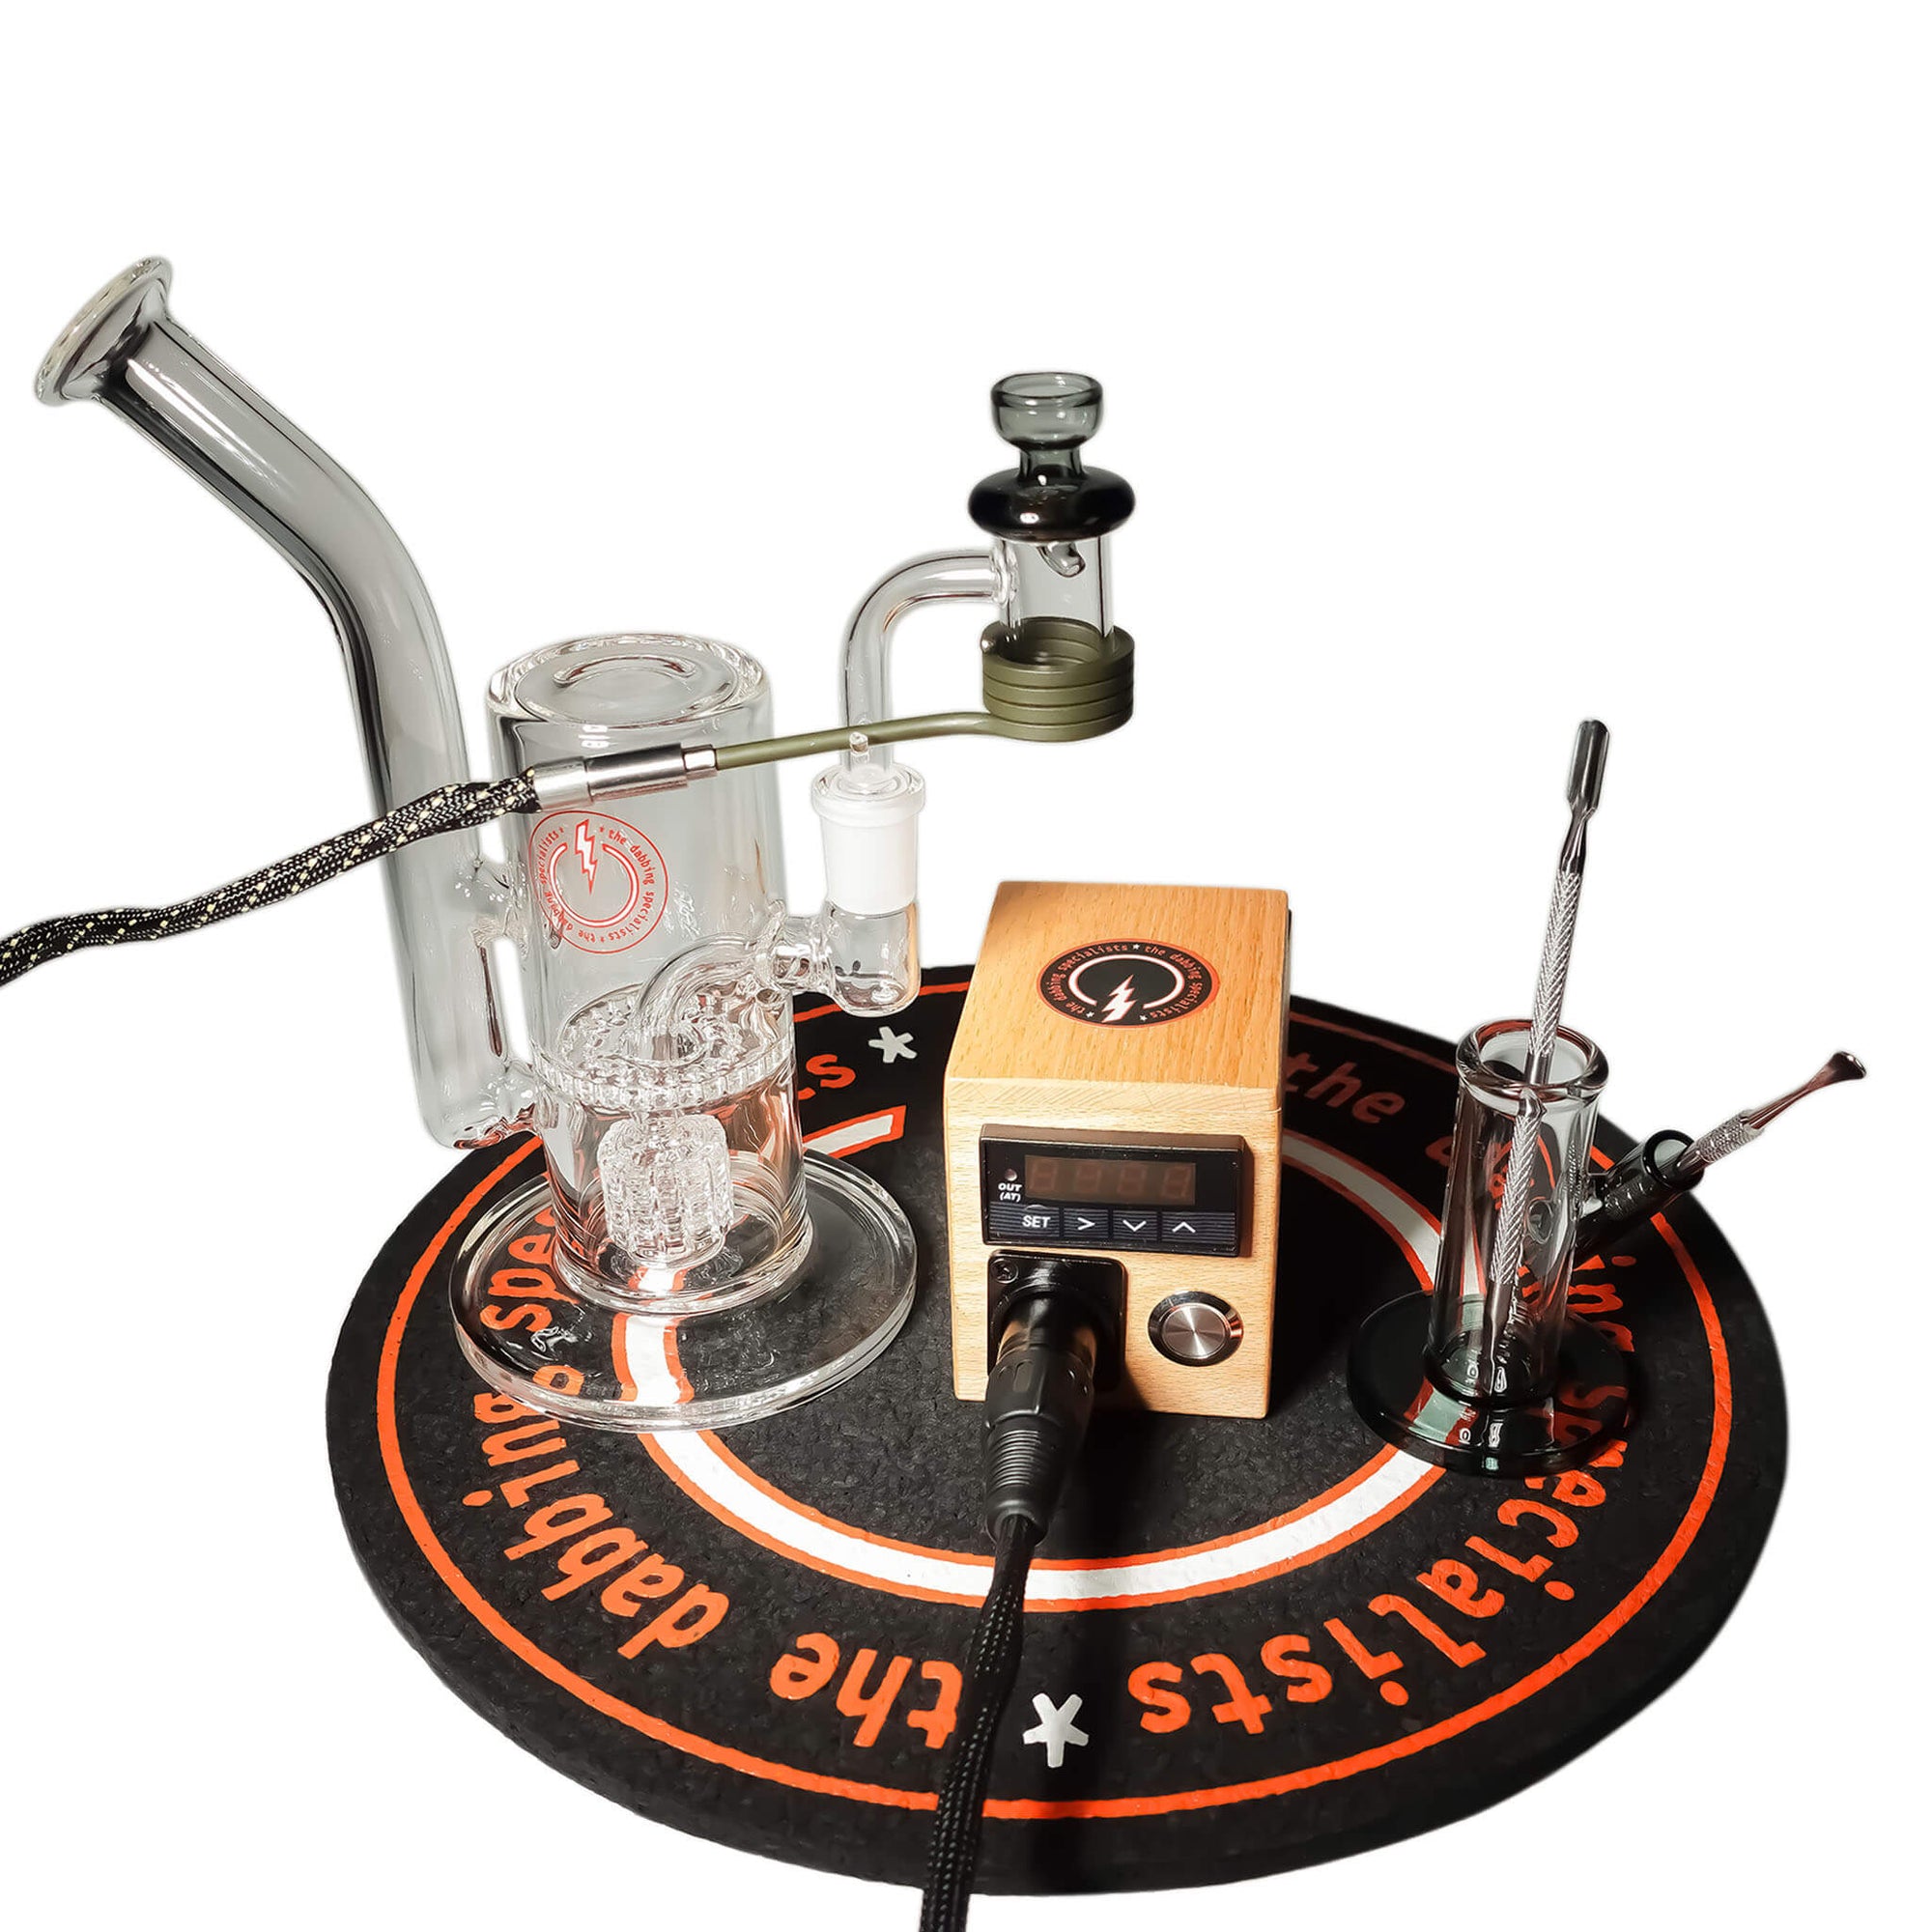 Reborn 20mm E-Banger Deluxe Enail Kit | Red Kit View | the dabbing specialists